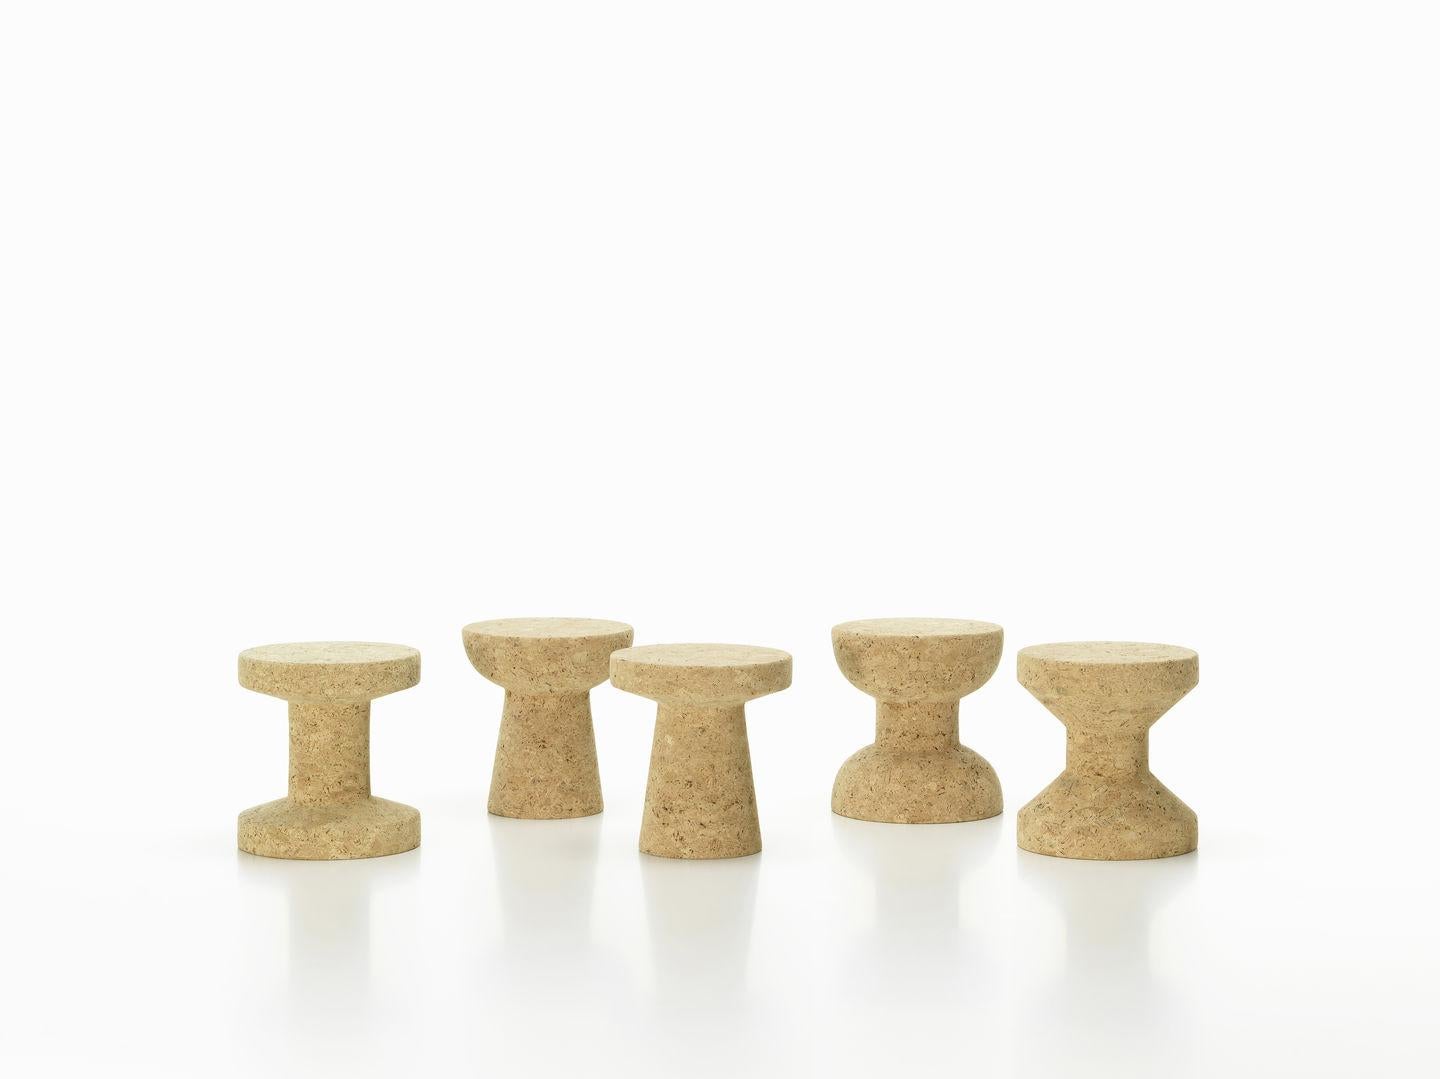 Stools designed by Jasper Morrison in 2004.
Manufactured by Vitra, Switzerland.

The robust members of the Cork Family stand firmly, making them suited for use as side tables or stools. They benefit from the advantageous natural properties of